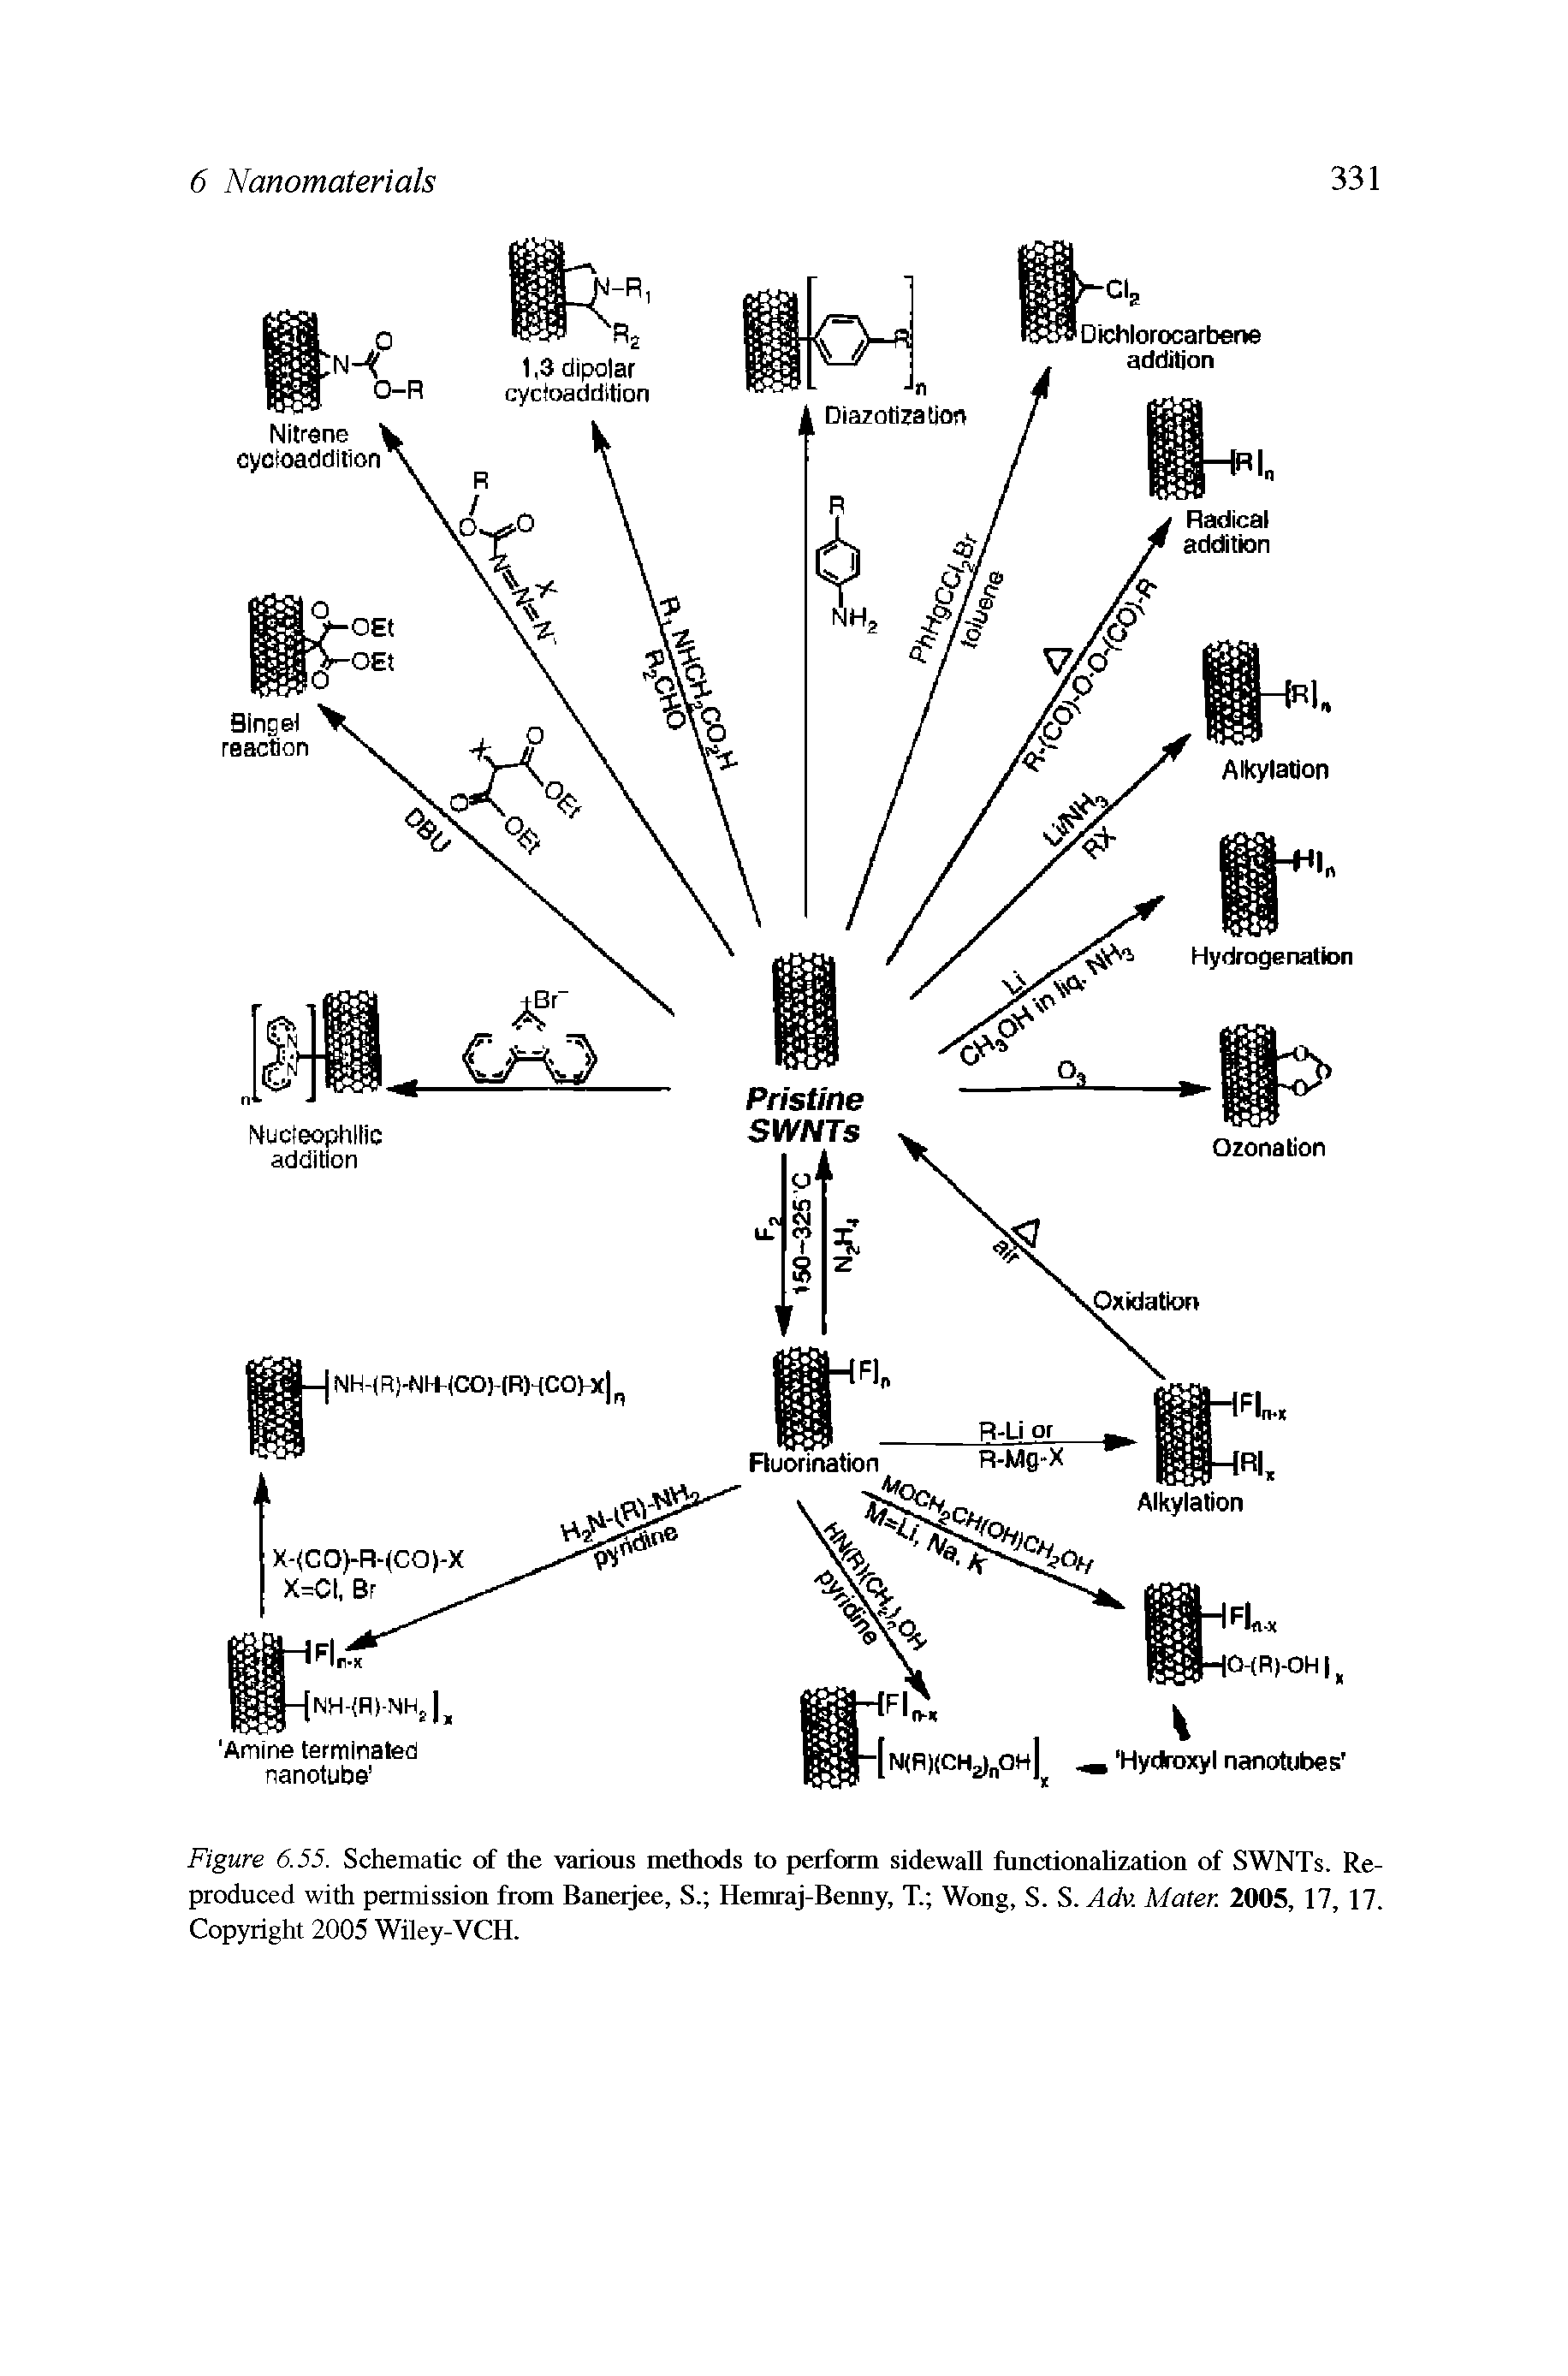 Figure 6.55. Schematic of the various methods to perform sidewall functionalization of SWNTs. Reproduced with permission from Baneijee, S. Hemraj-Benny, T. Wong, S. S. Adv. Mater. 2005, 17, 17. Copyright 2005 Wiley-VCH.